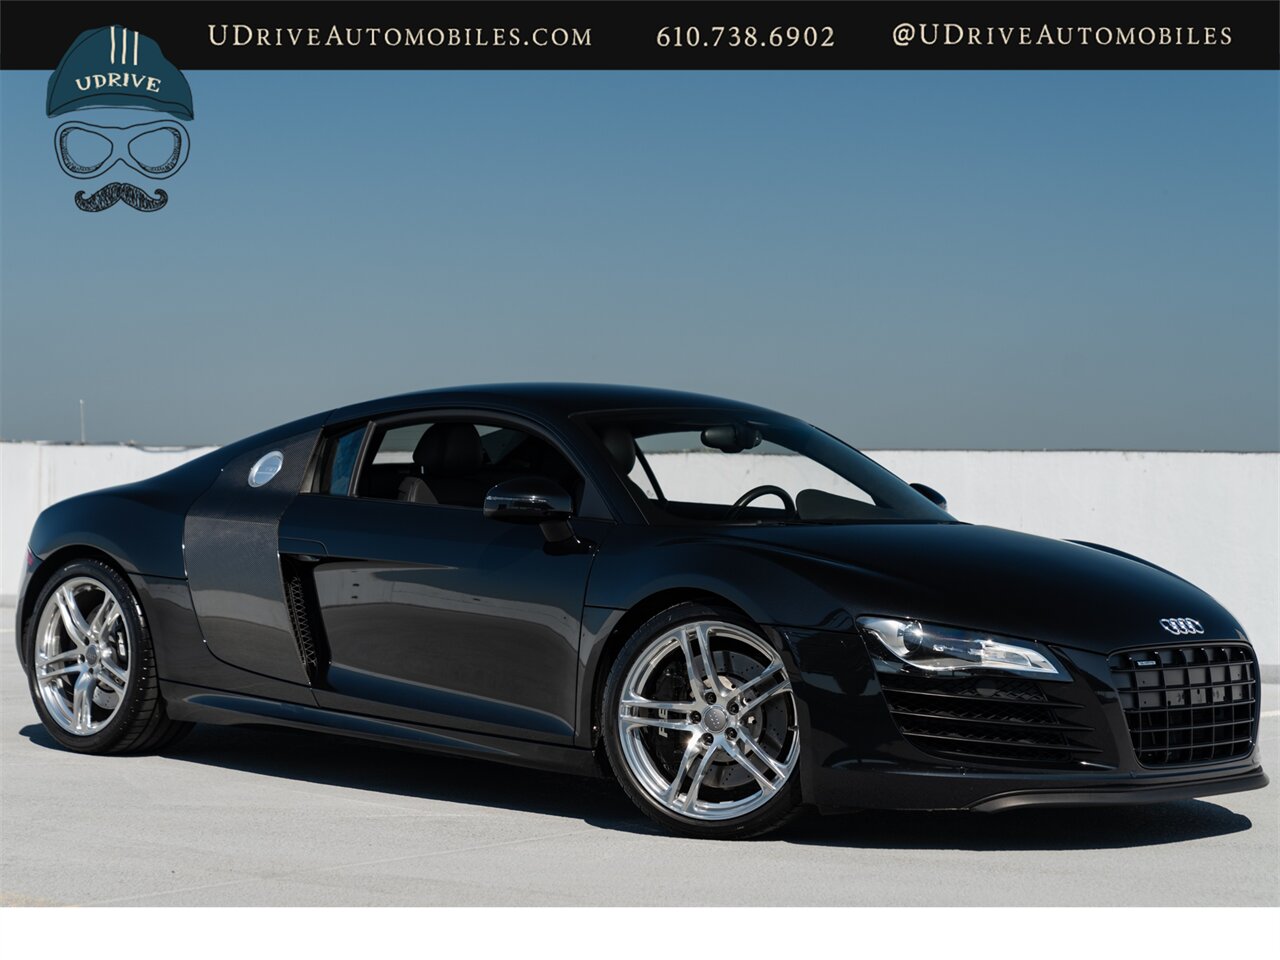 2009 Audi R8 Quattro  4.2L V8 6 Speed Manual - Photo 3 - West Chester, PA 19382